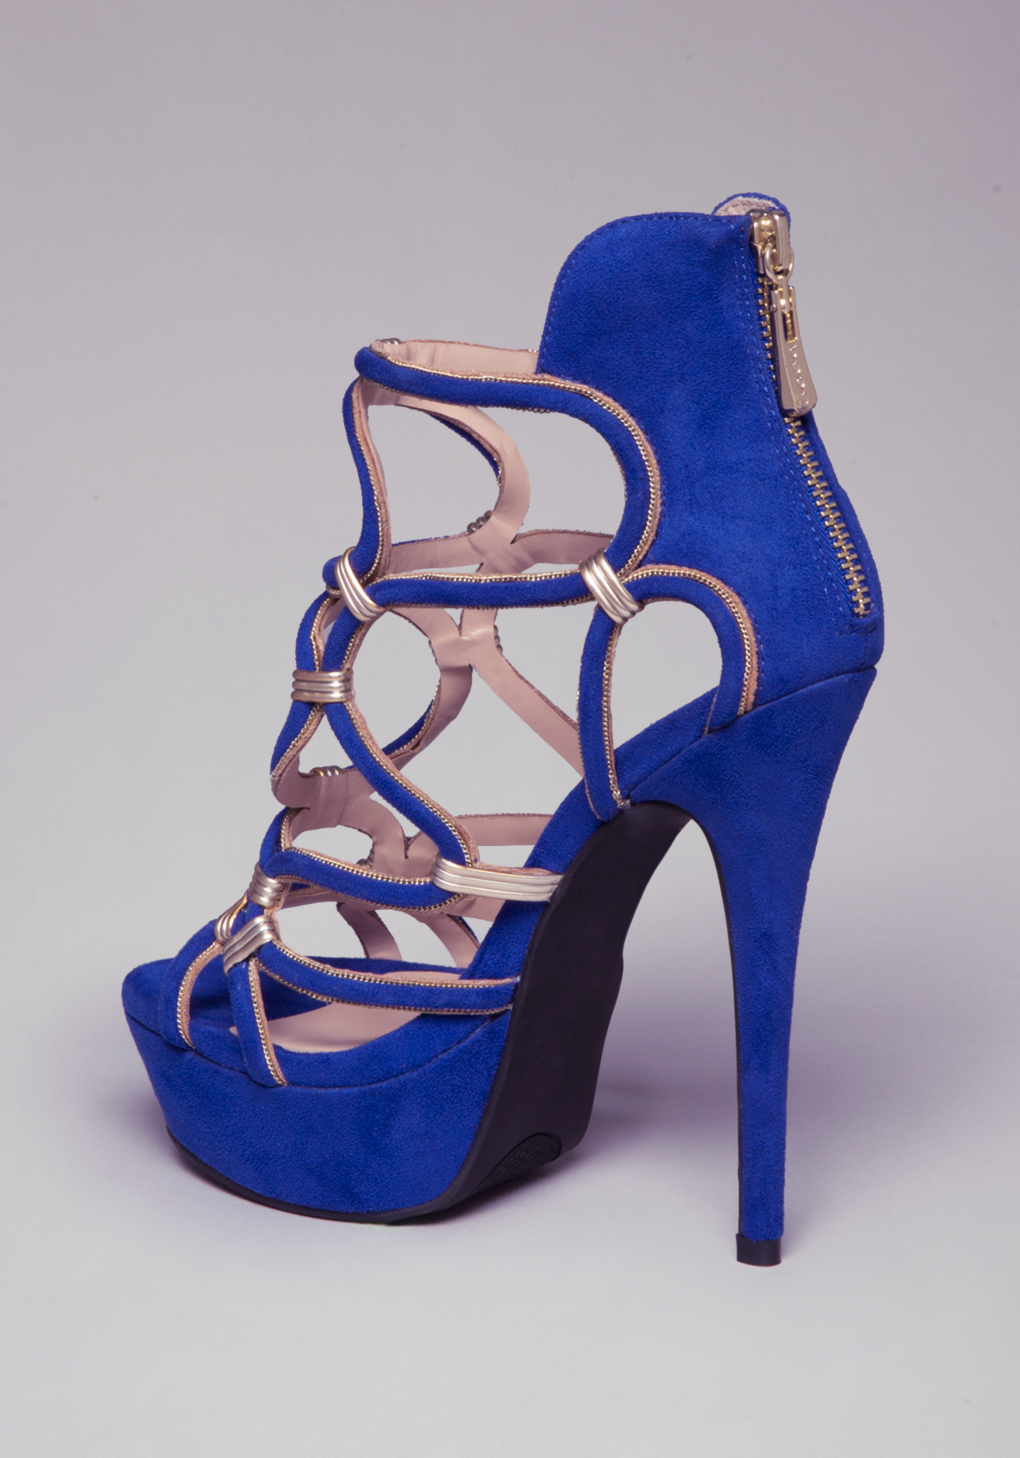 Bebe Charmaine Strappy Sandals in Blue - Lyst